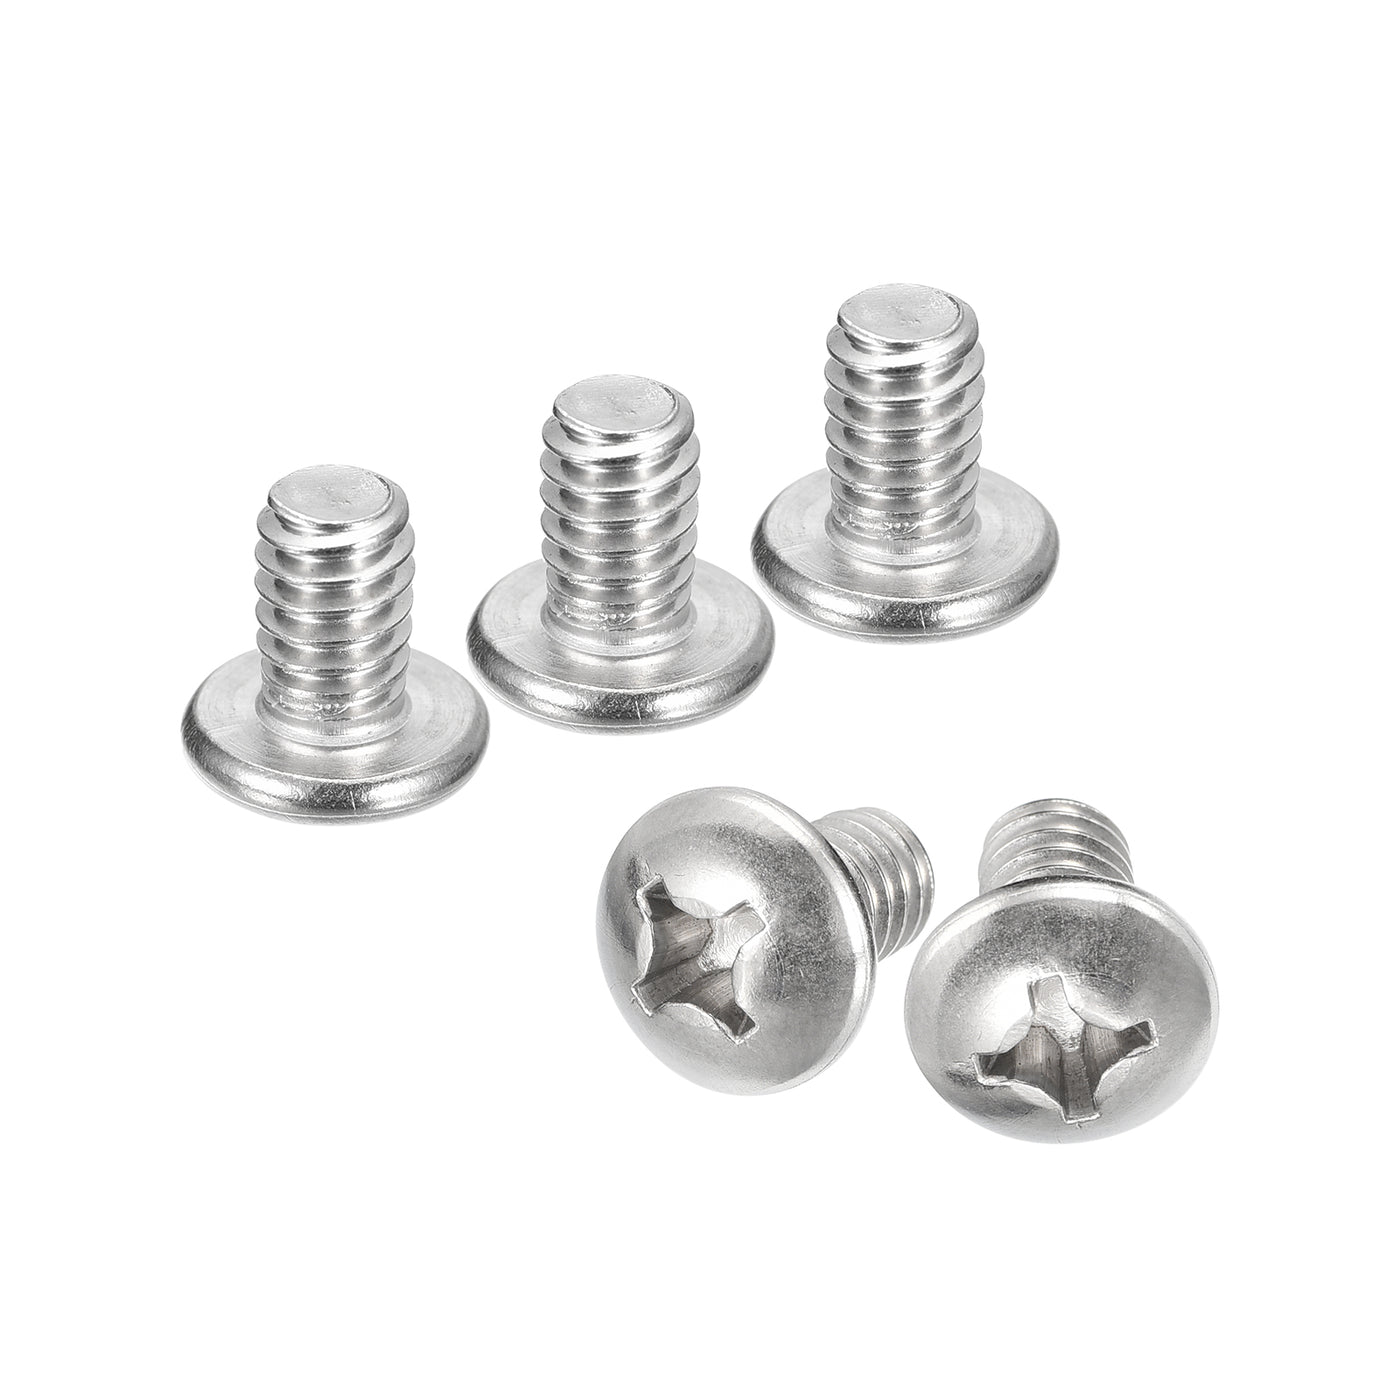 uxcell Uxcell 1/4-20x3/8" Pan Head Machine Screws, Stainless Steel 18-8 Screw, Pack of 20